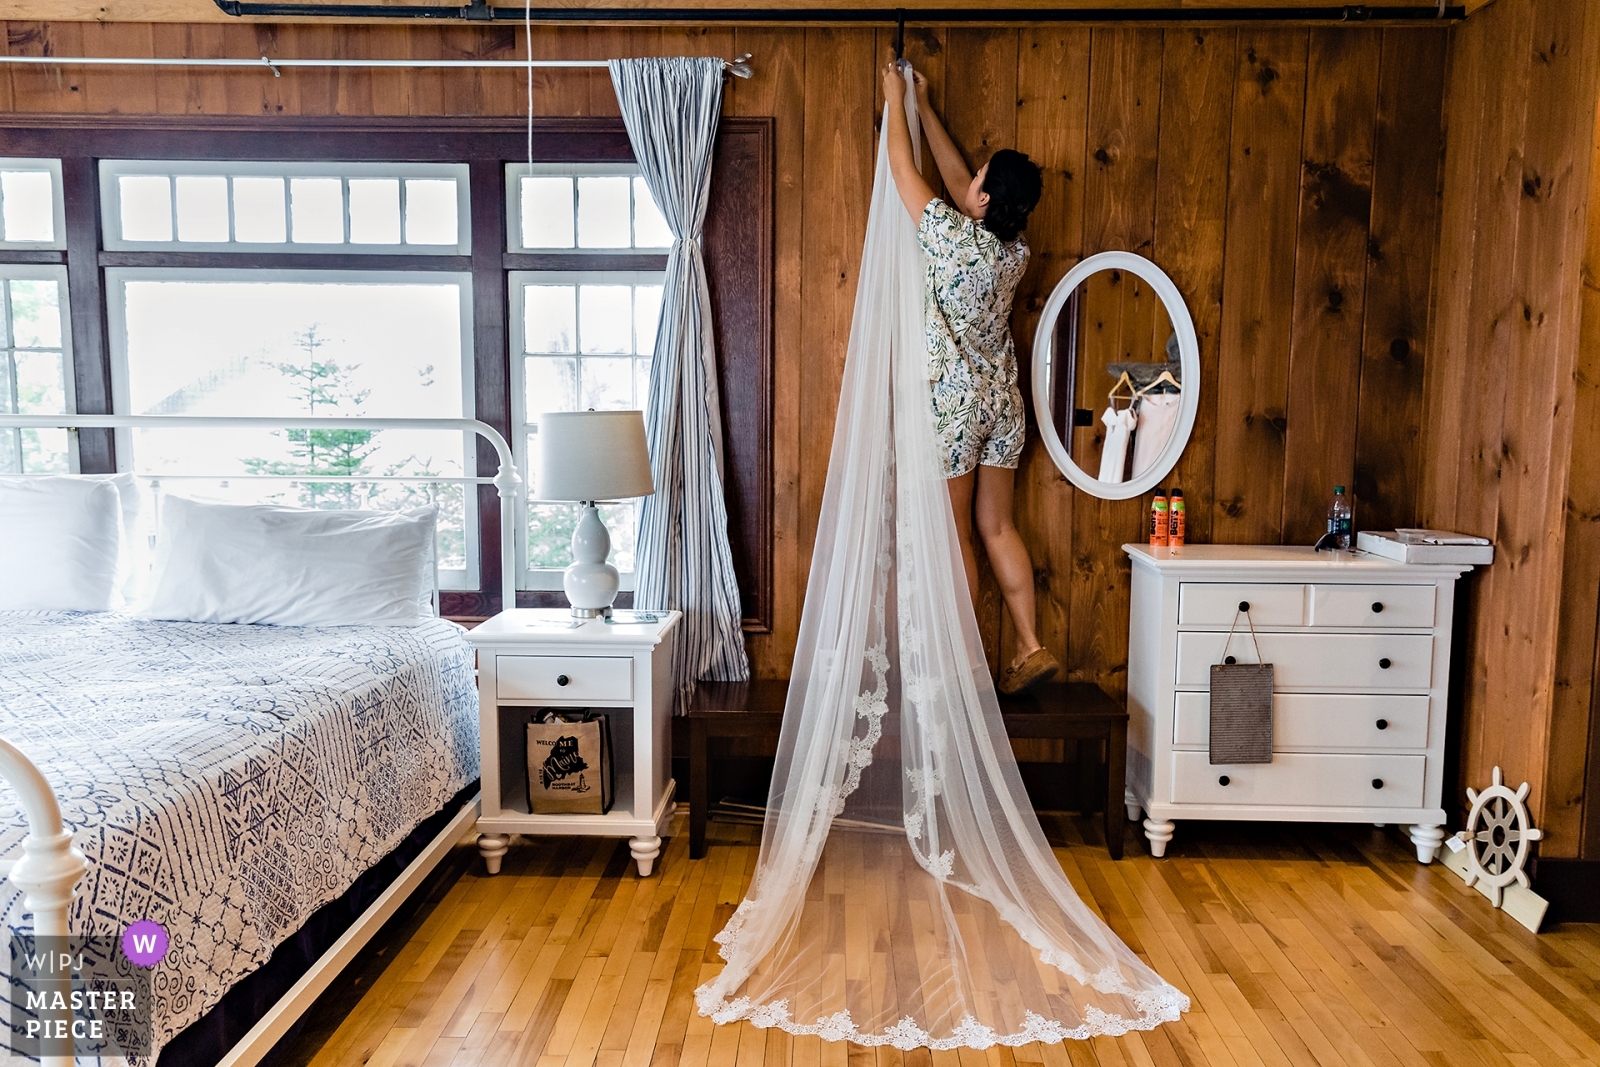 Linekin Bay Resort Wedding Photographer won an award for this Boothbay Harbor celebration where the veil is hung in the cabin to prep for the day.